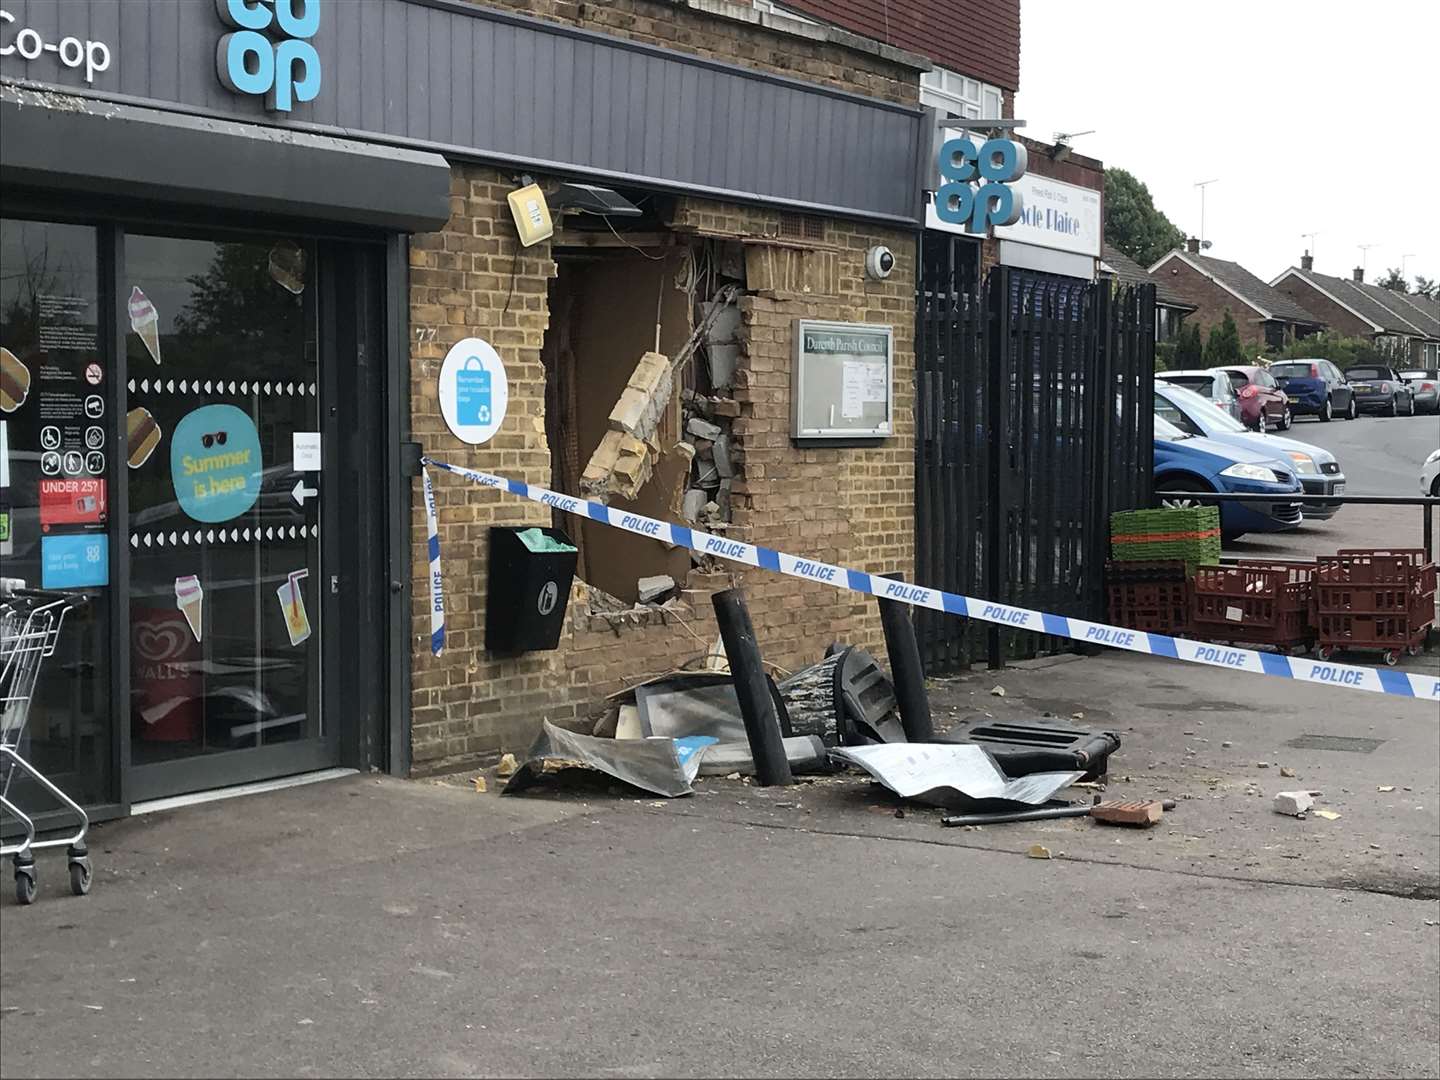 Ram-raiders have struck at a Co-Op in Lane End near Darenth (13635223)